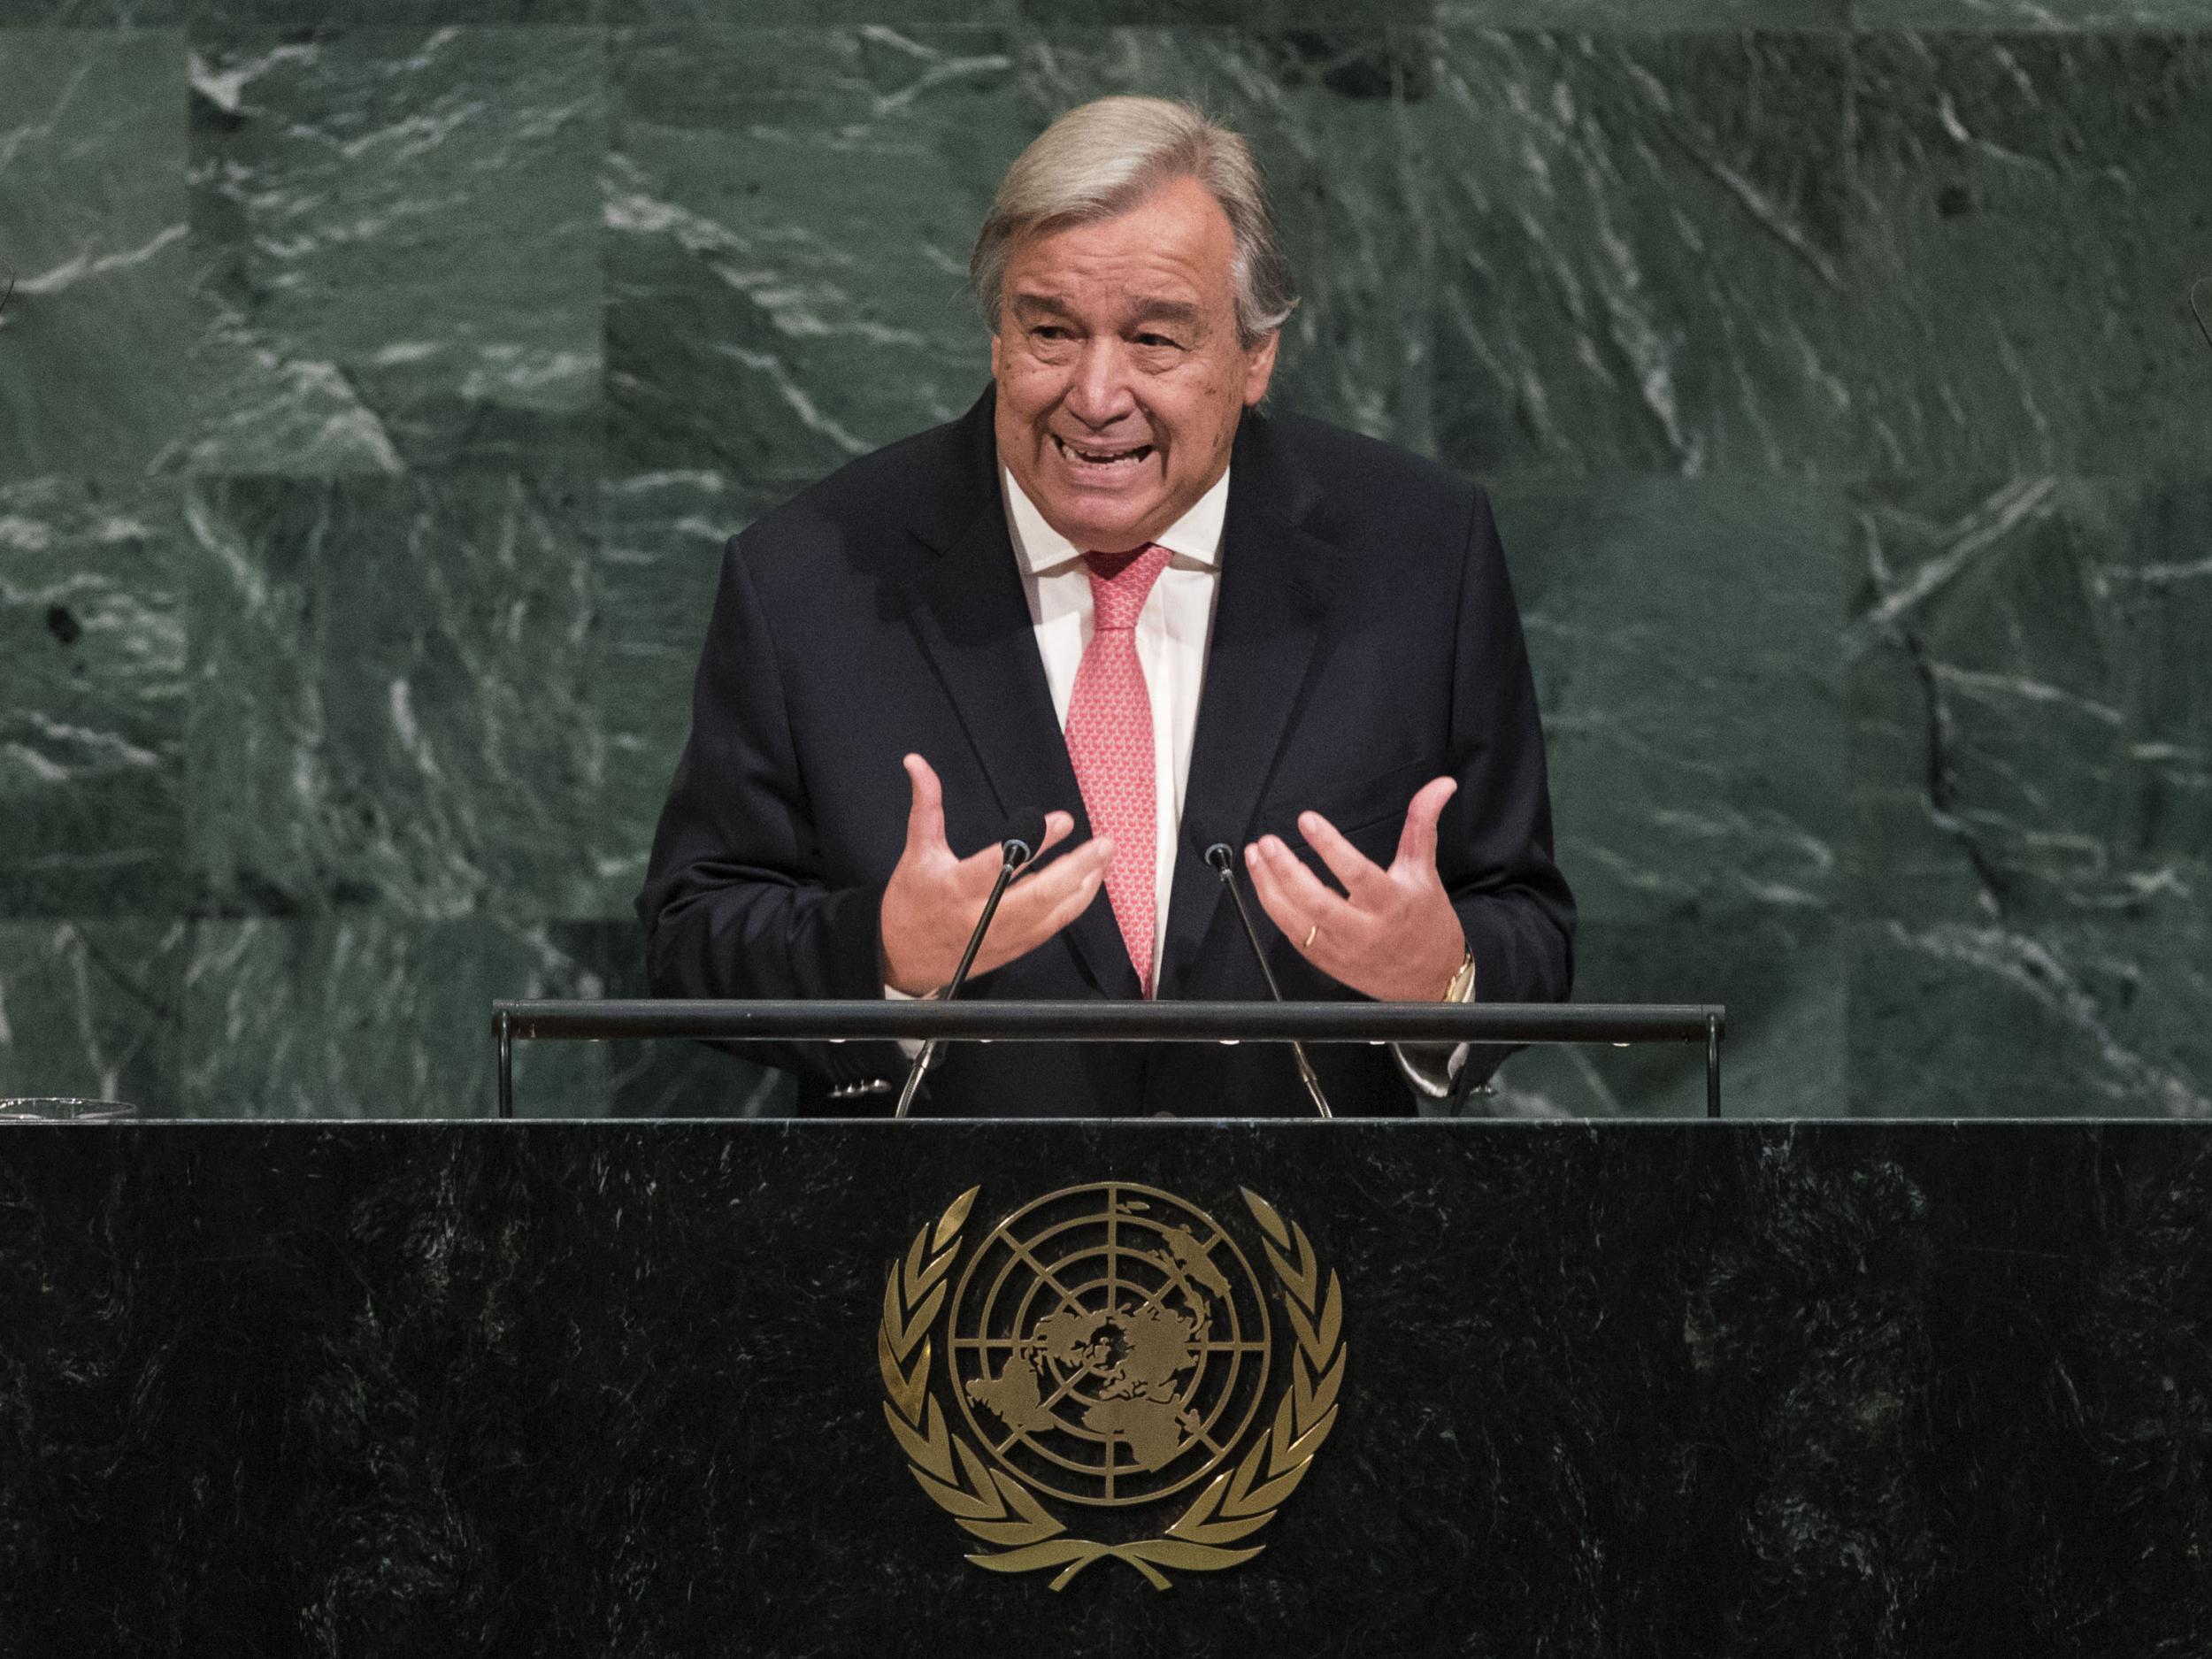 Antonio Guterres, now UN secretary general, implemented the policy when he was the socialist Prime Minister of Portugal